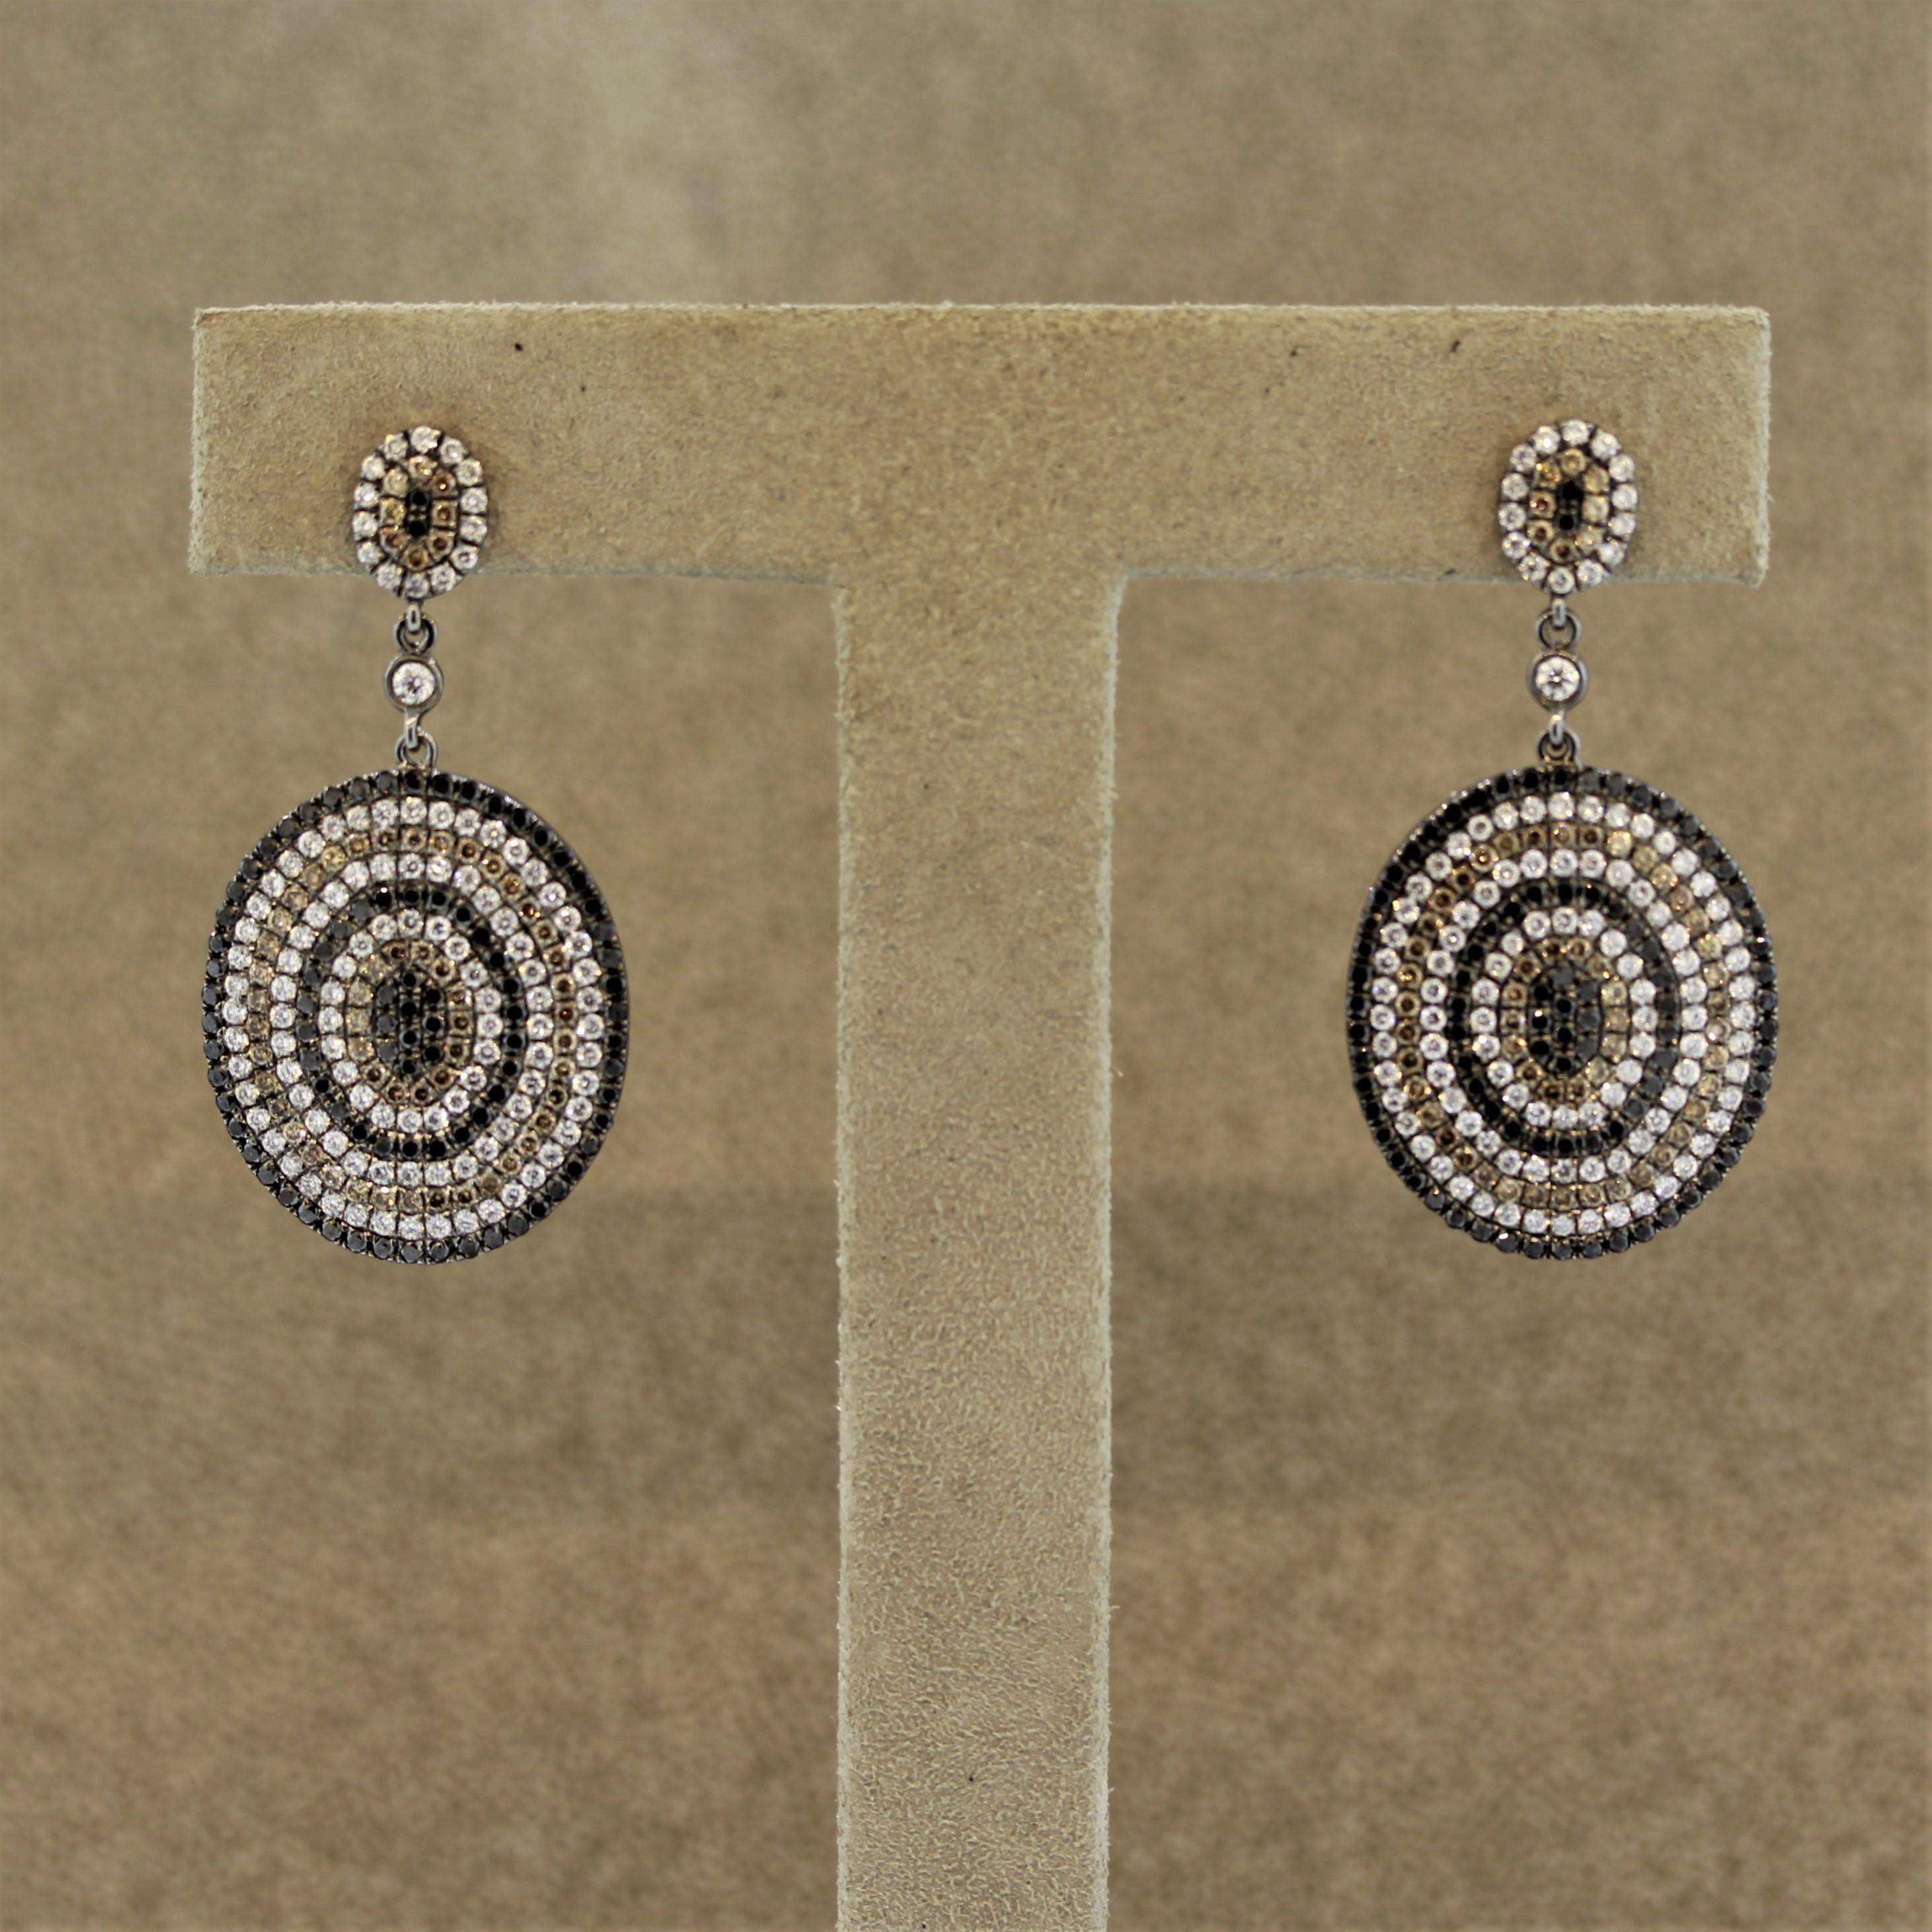 A unique pair of earrings made in 18k gold with a black rhodium finish giving the gold a darker metallic look. They feature fancy black and cognac colored diamonds along with classic colorless white diamonds which are set in a pattern. They weigh a